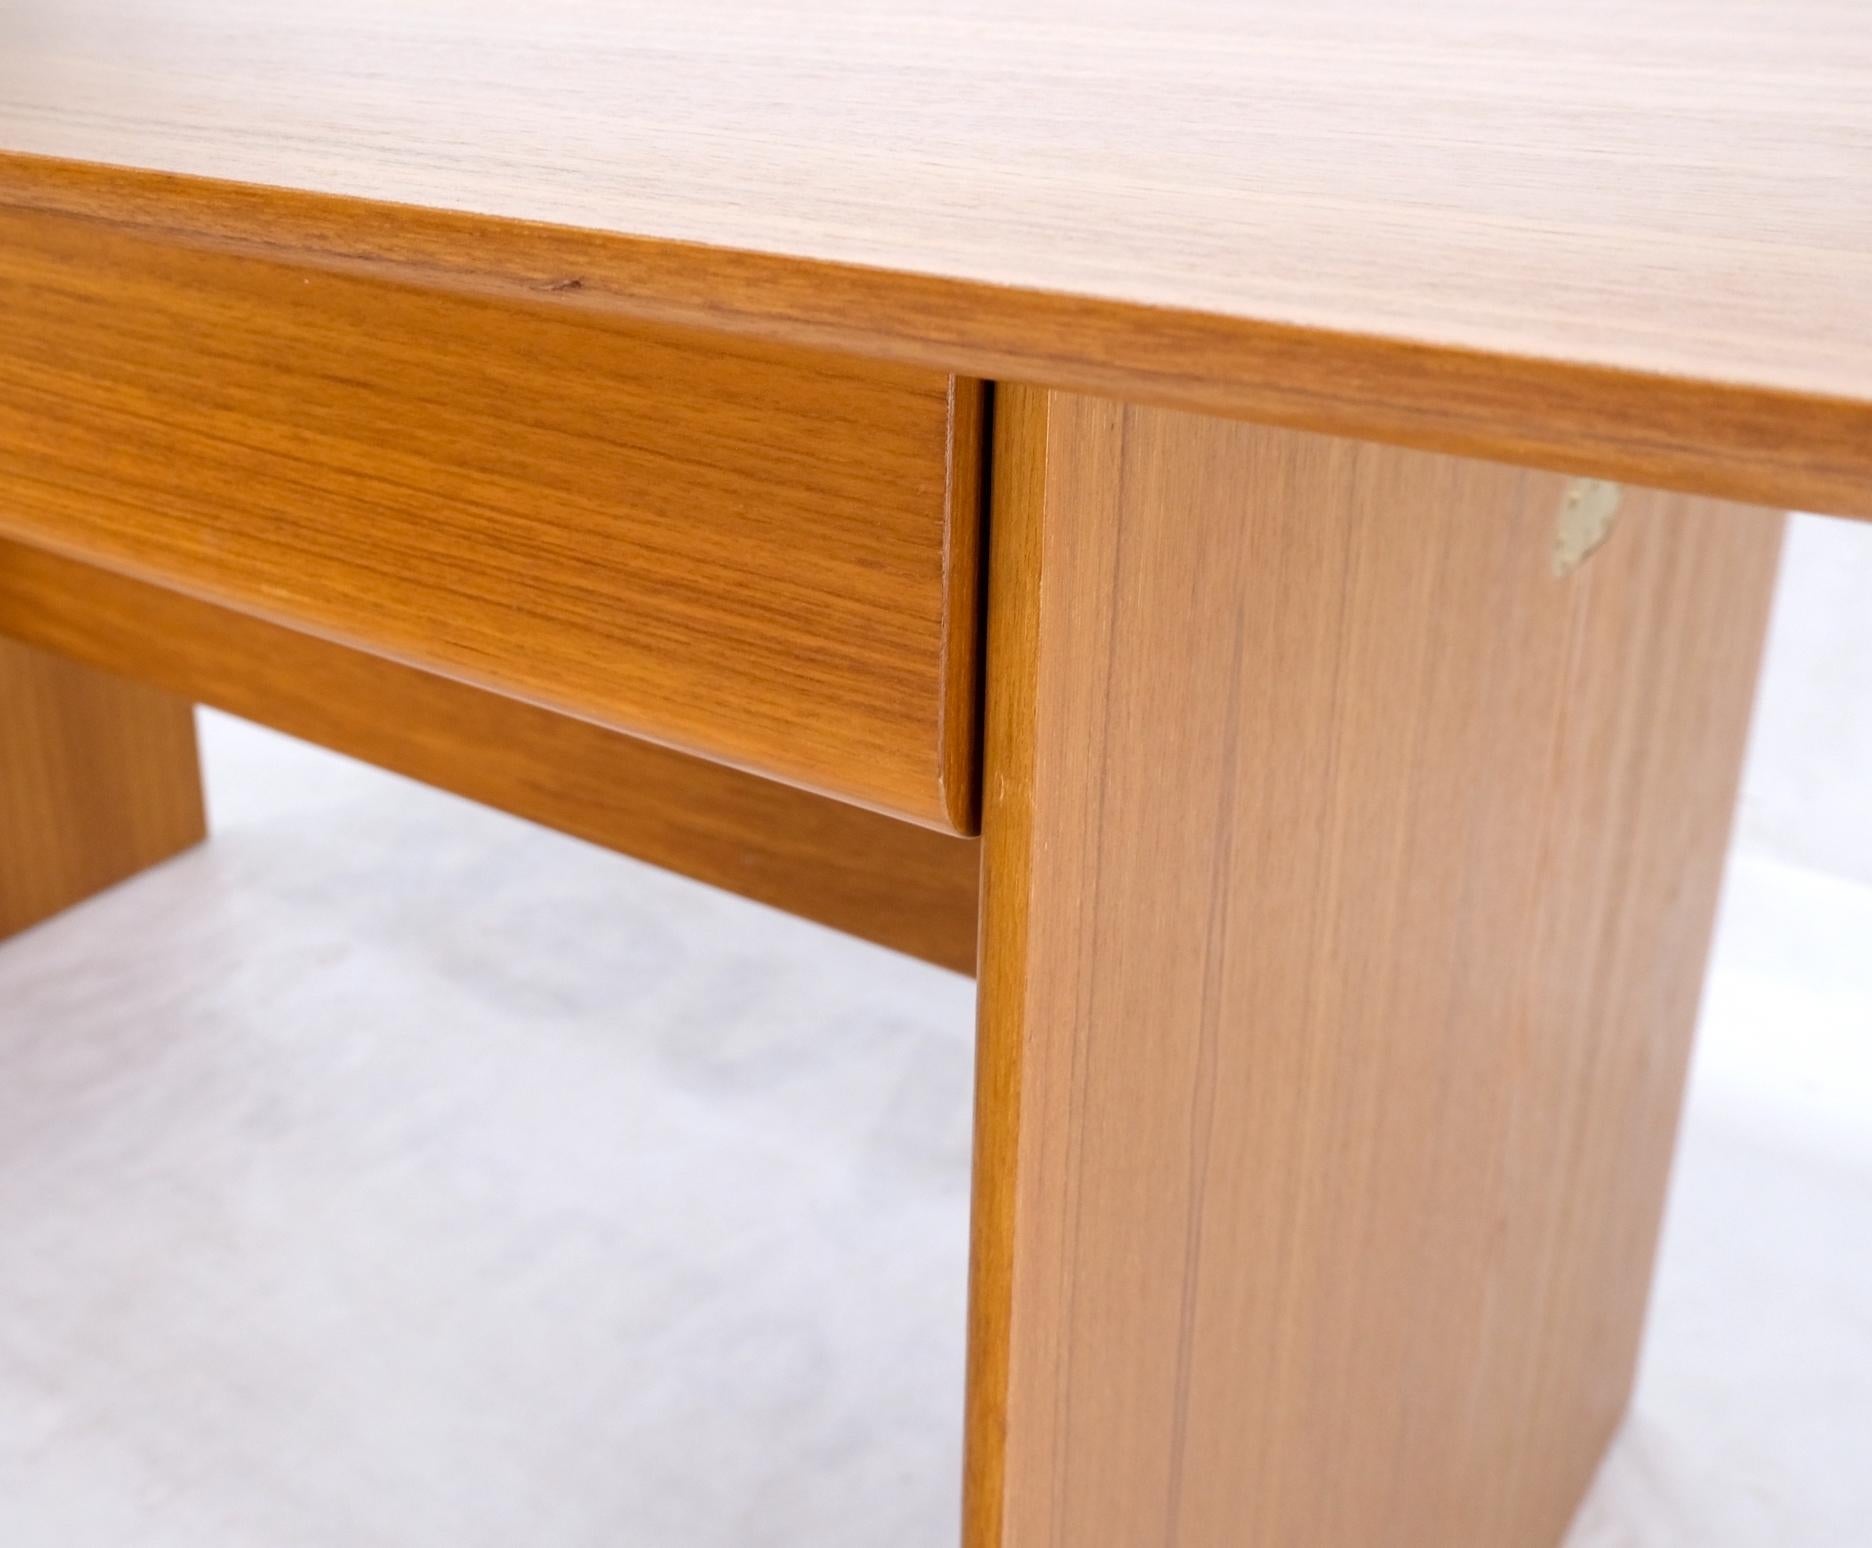 Lacquered Danish Mid-Century Modern Convertible Fold Out Console Dining Table 1 Drawer For Sale